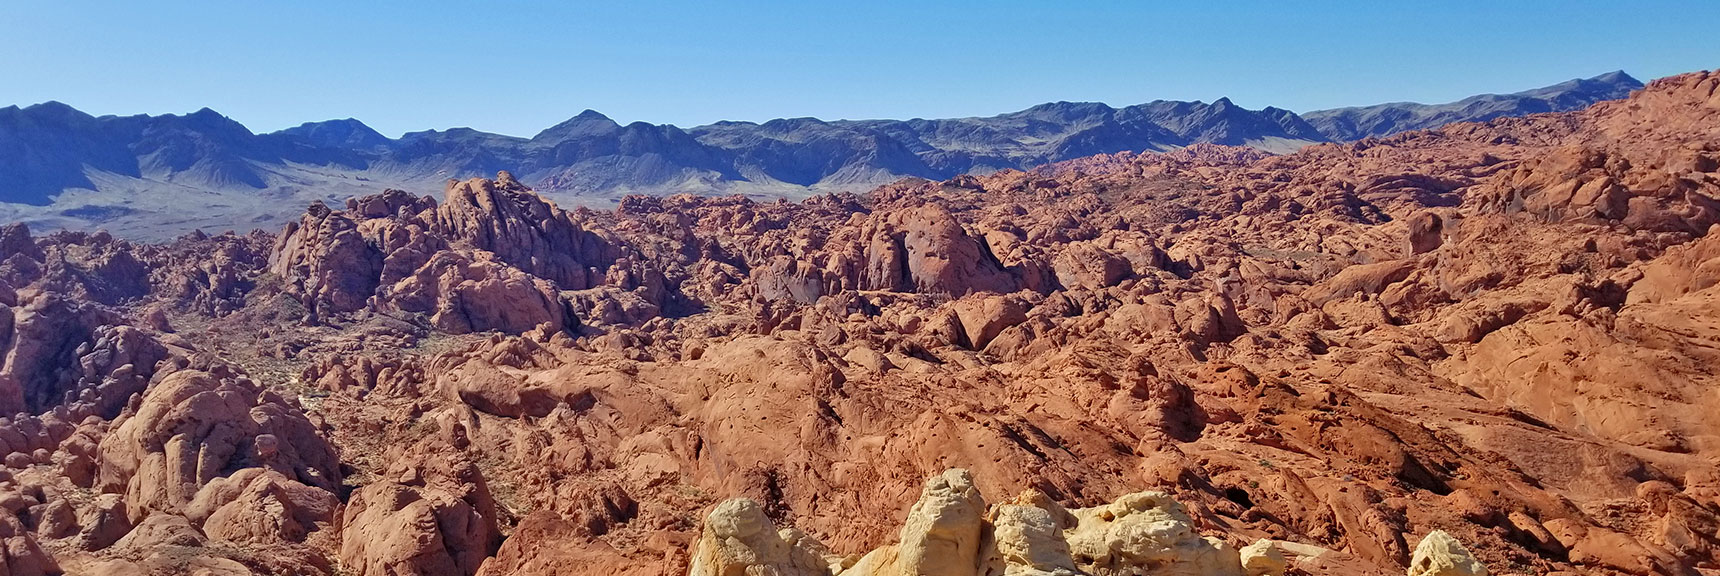 View to the Northwest from Silica Dome Summit in Valley of Fire State Park, Nevada